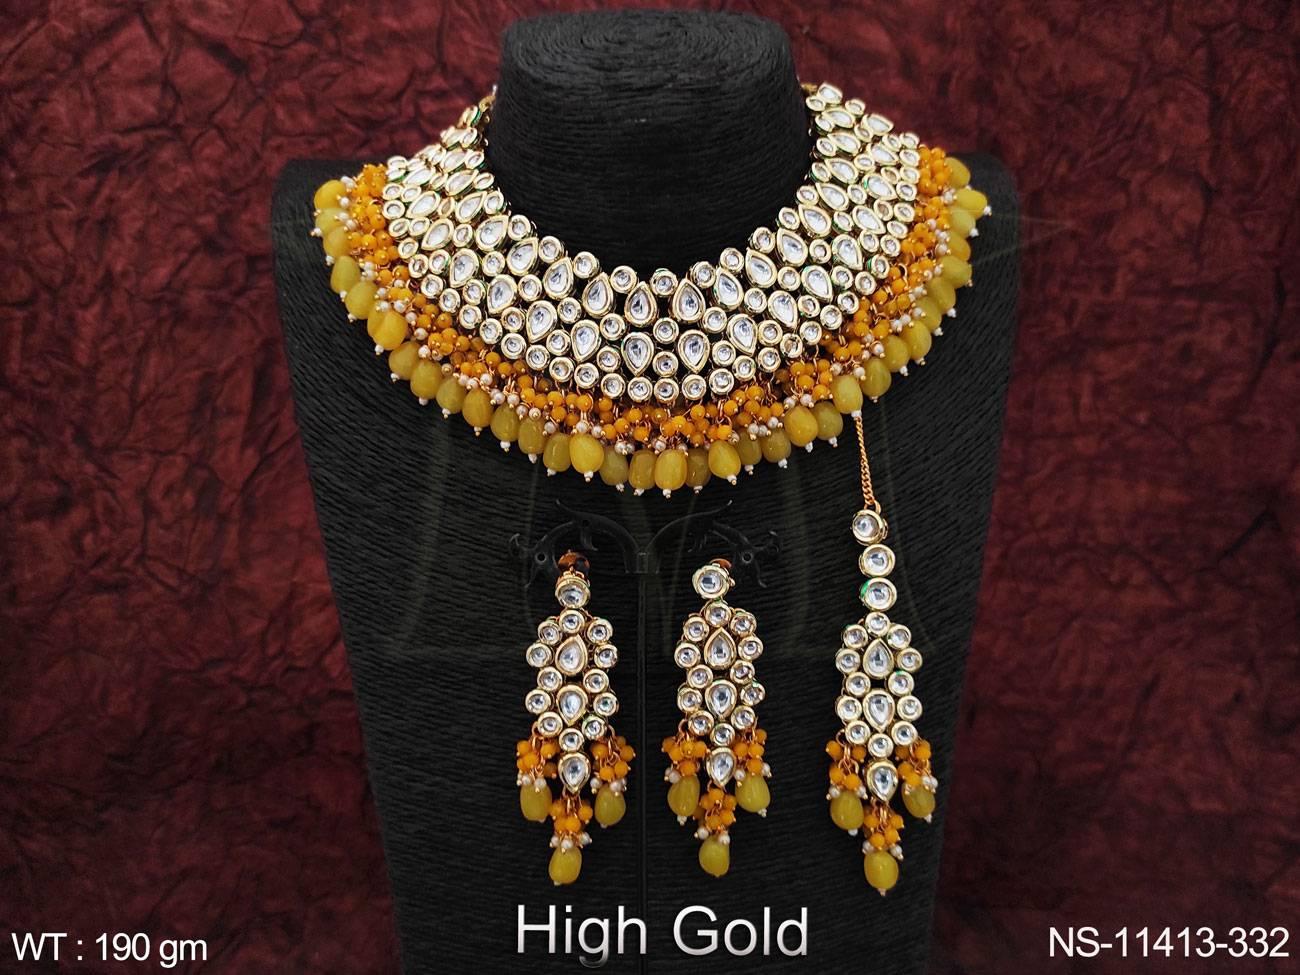 Crafted with high-quality Kundan stones and featuring a stunning high gold polish, this choker necklace set is the perfect addition to your party wear collection.